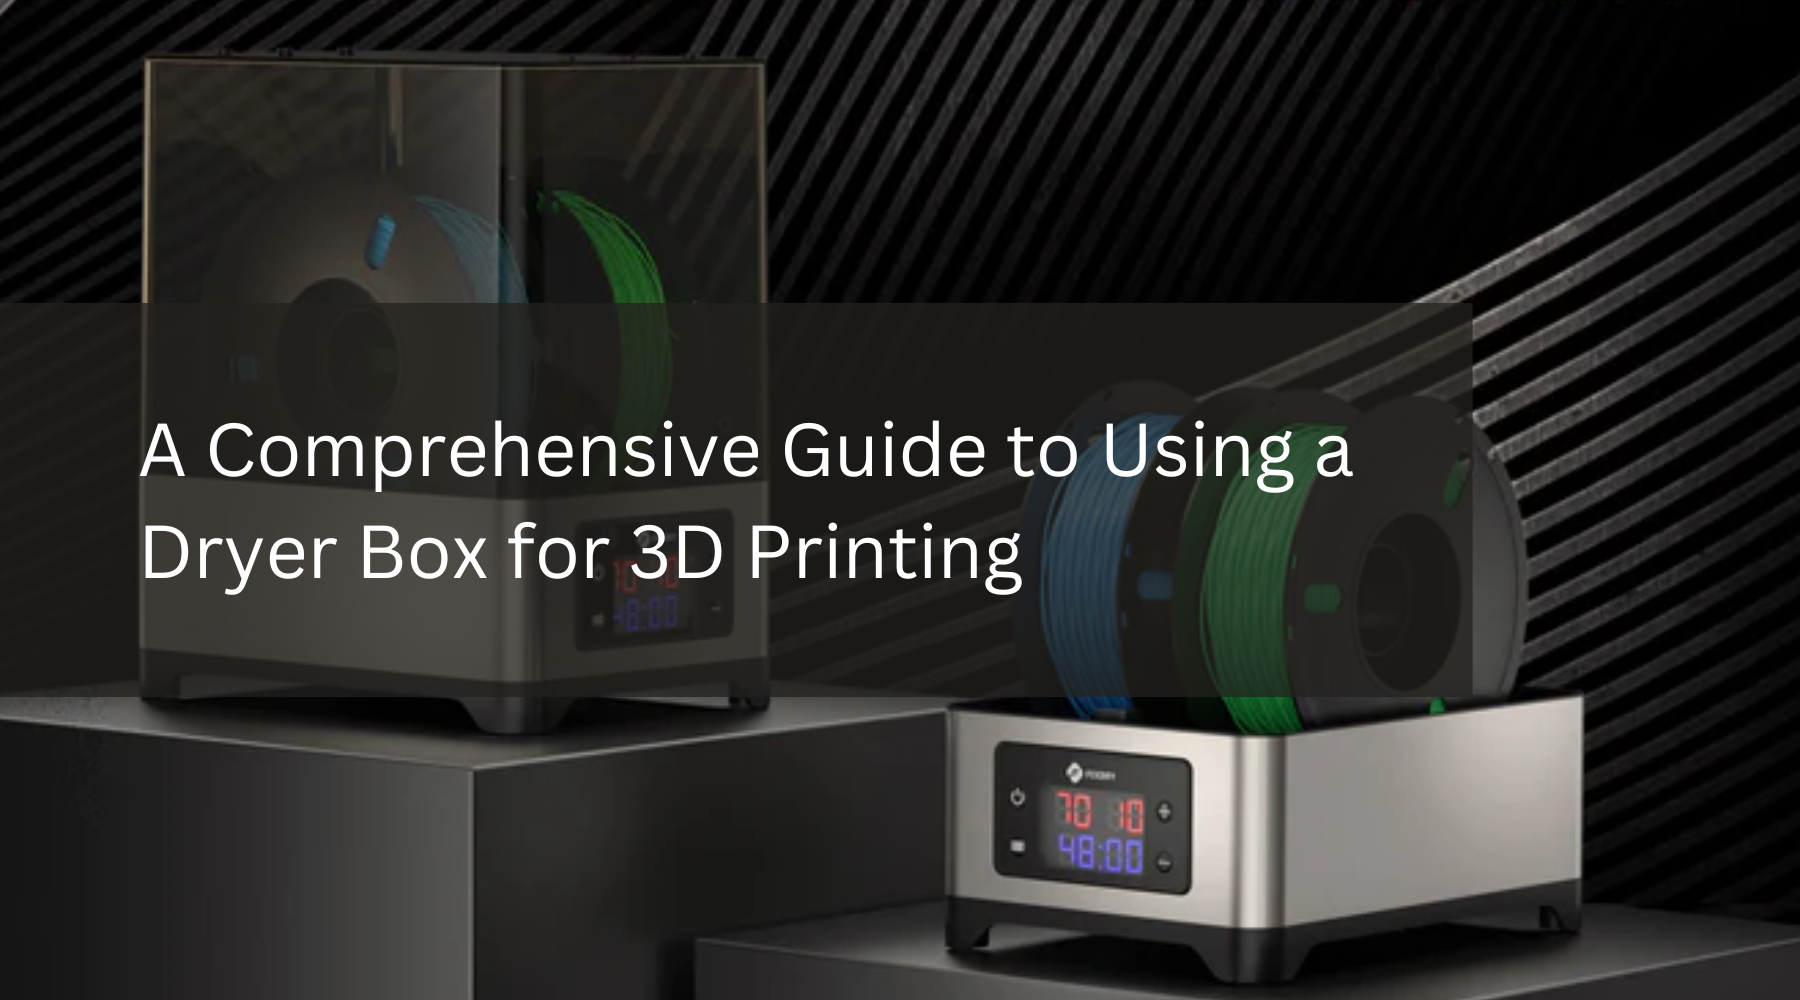 A Comprehensive Guide to Using a Dryer Box for 3D Printing